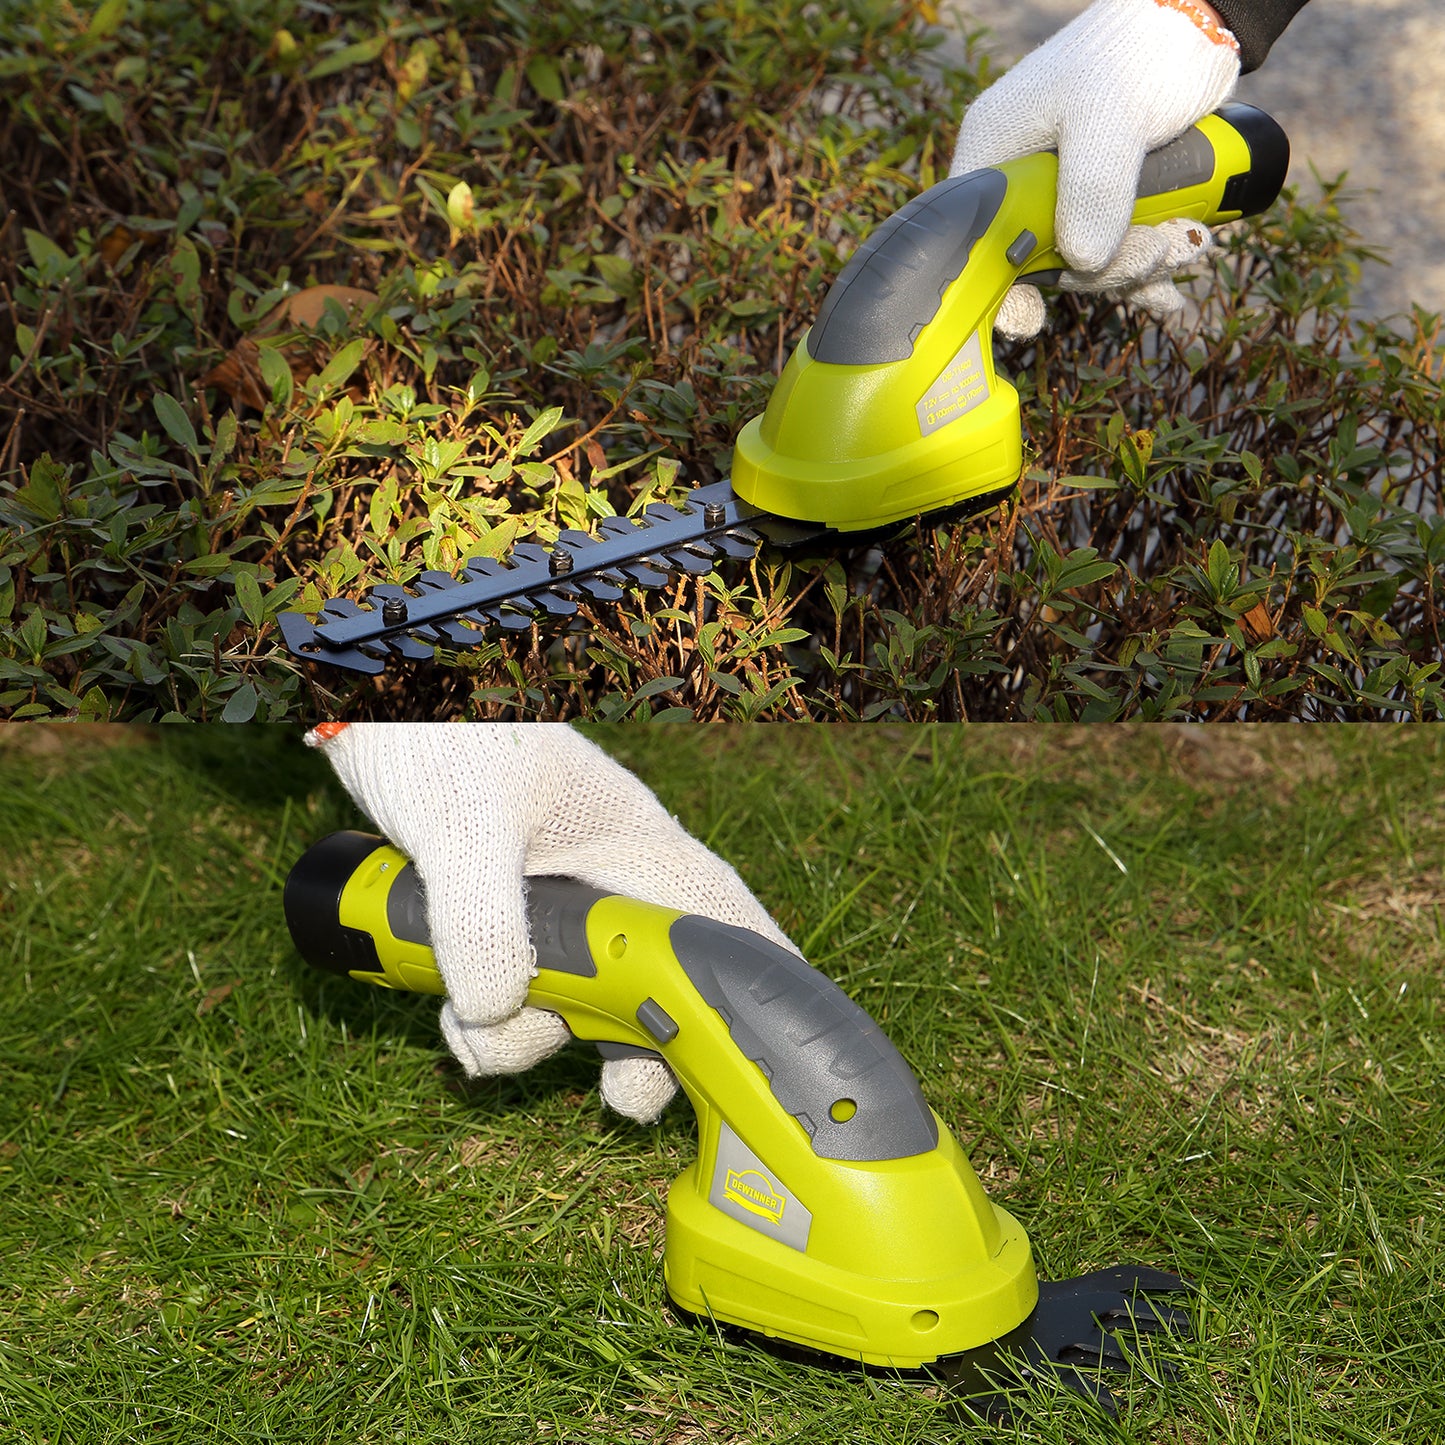 DEWINNER 2in1 Grass Shear & Hedge Trimmer with 7.2V Rechargeable  Lithium-Ion Battery, Edging and Shrub Shear, 2 Interchangeable Blades, Lightweight, Garden Cutting Edge Trimmer, Pruner - Handheld